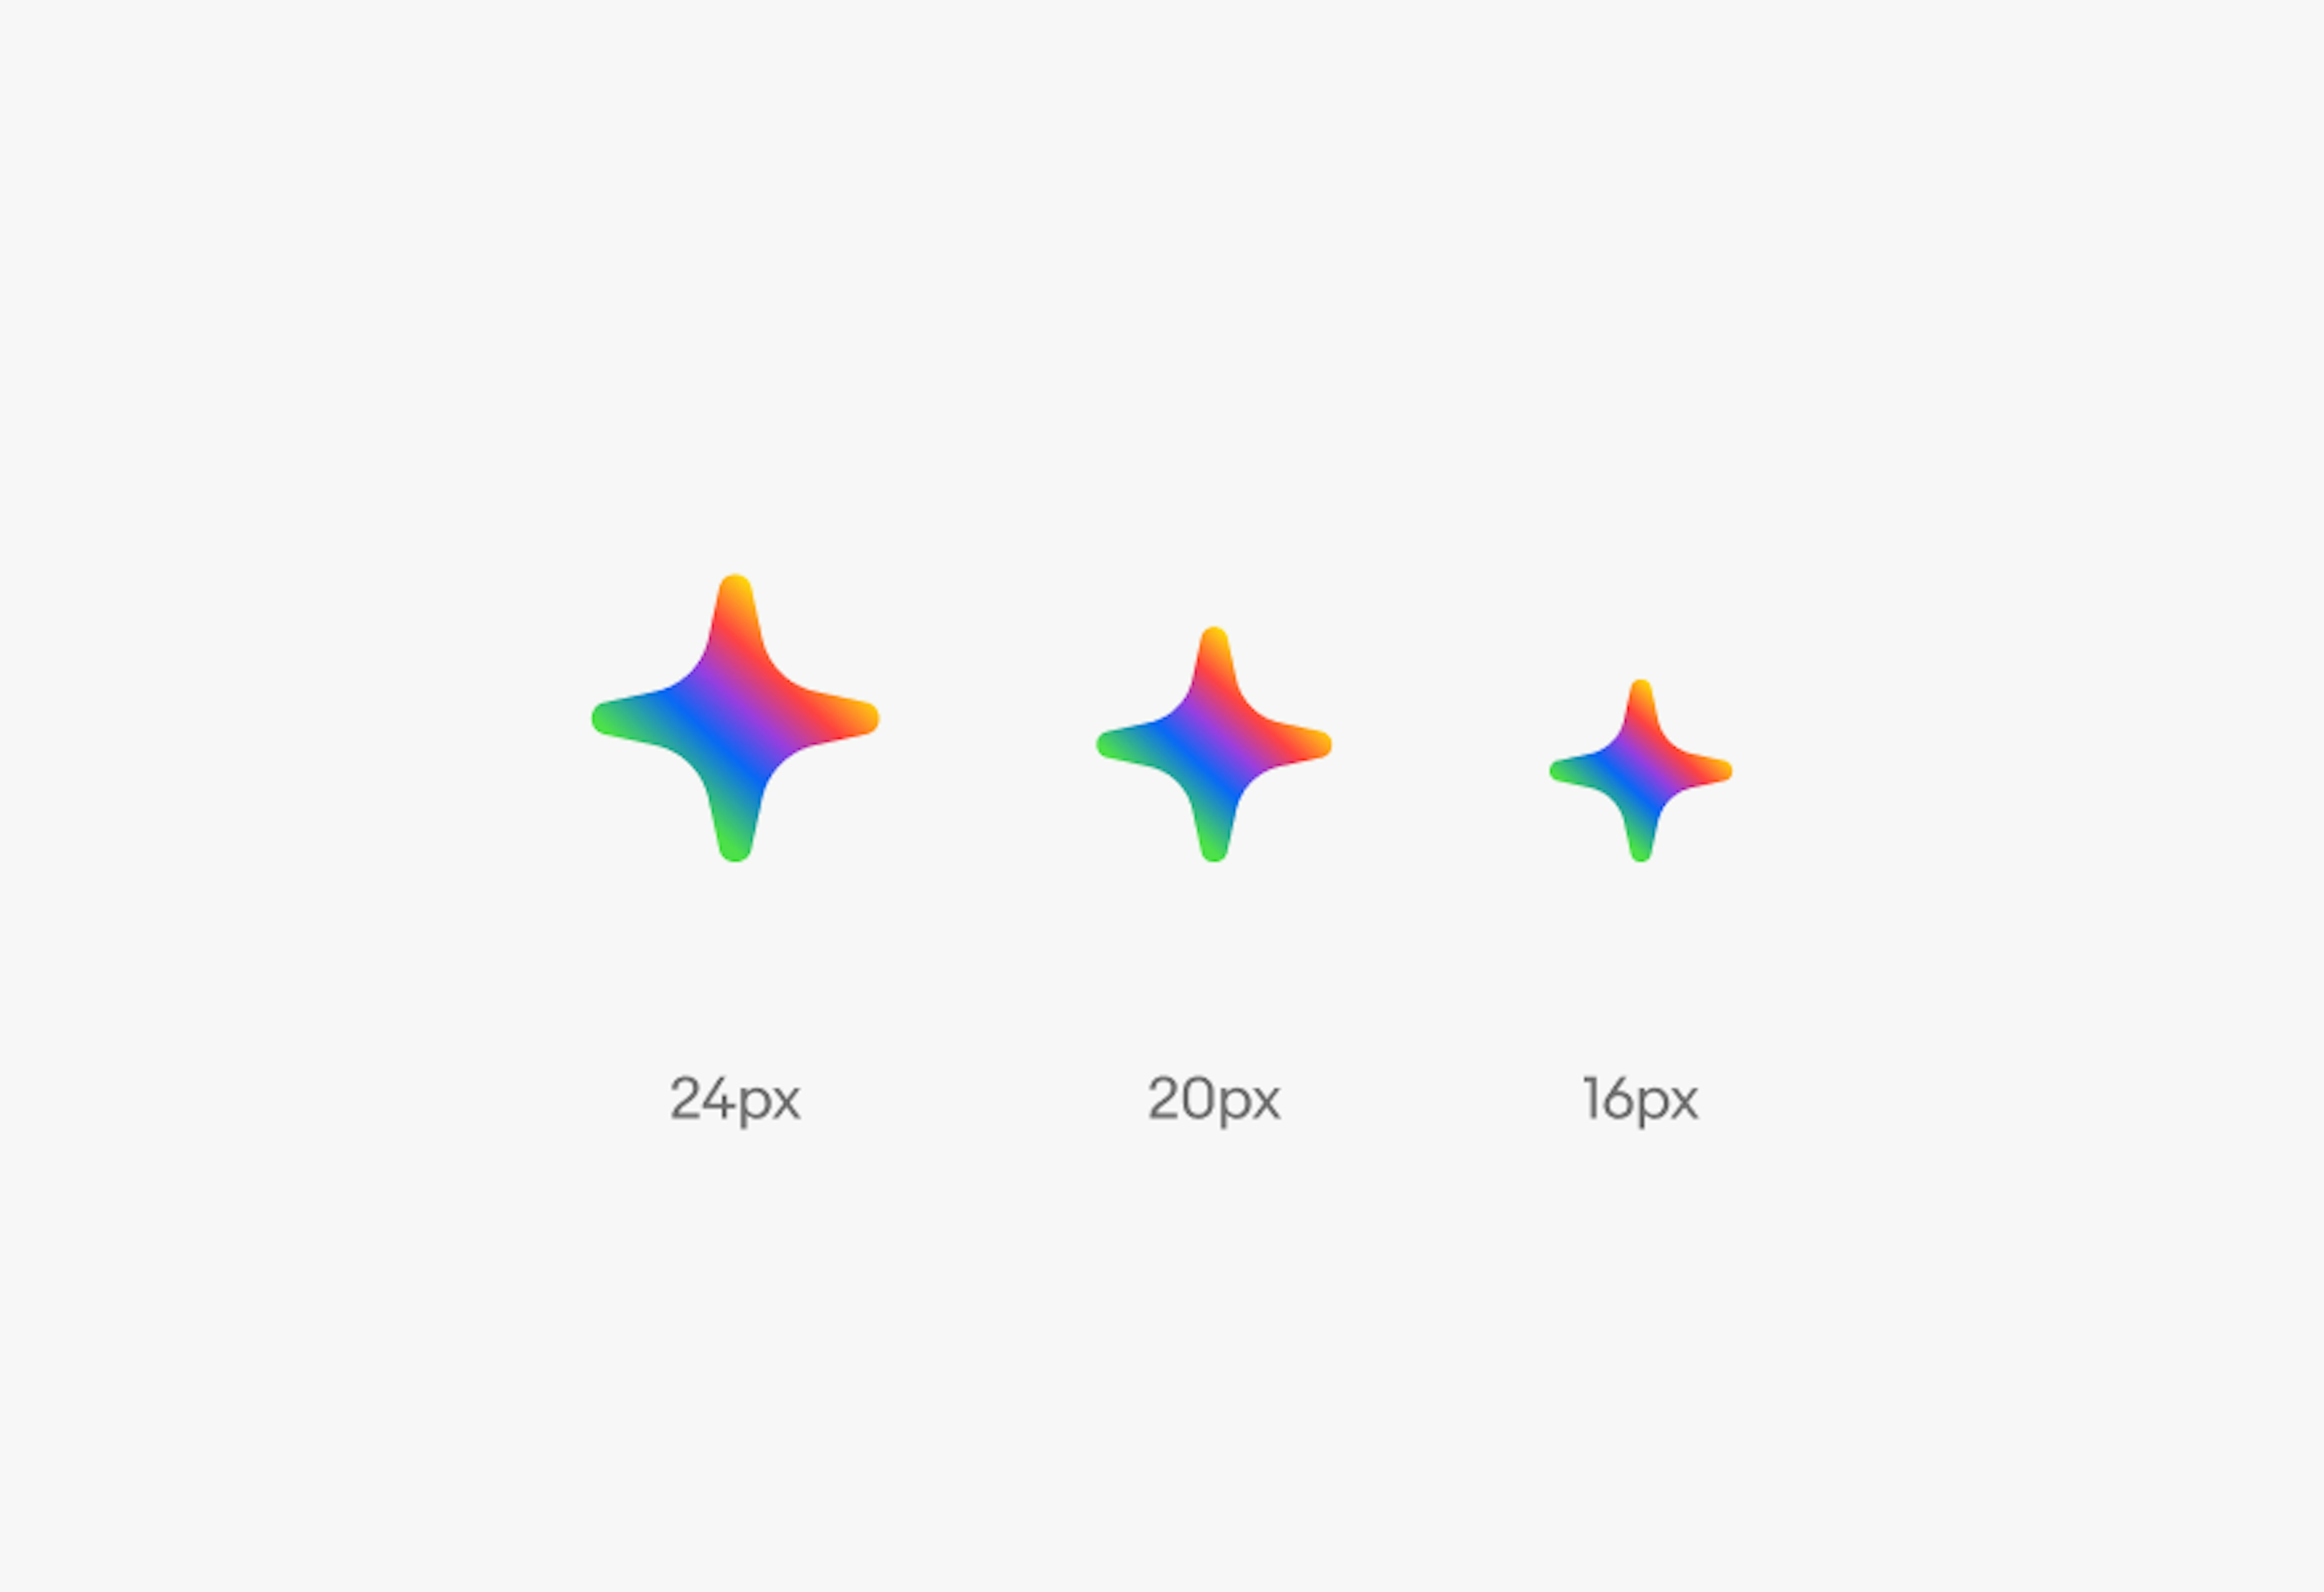 Our filled AI spectrum icon in full color in 3 different sizes - 24px, 20px, and 16px.